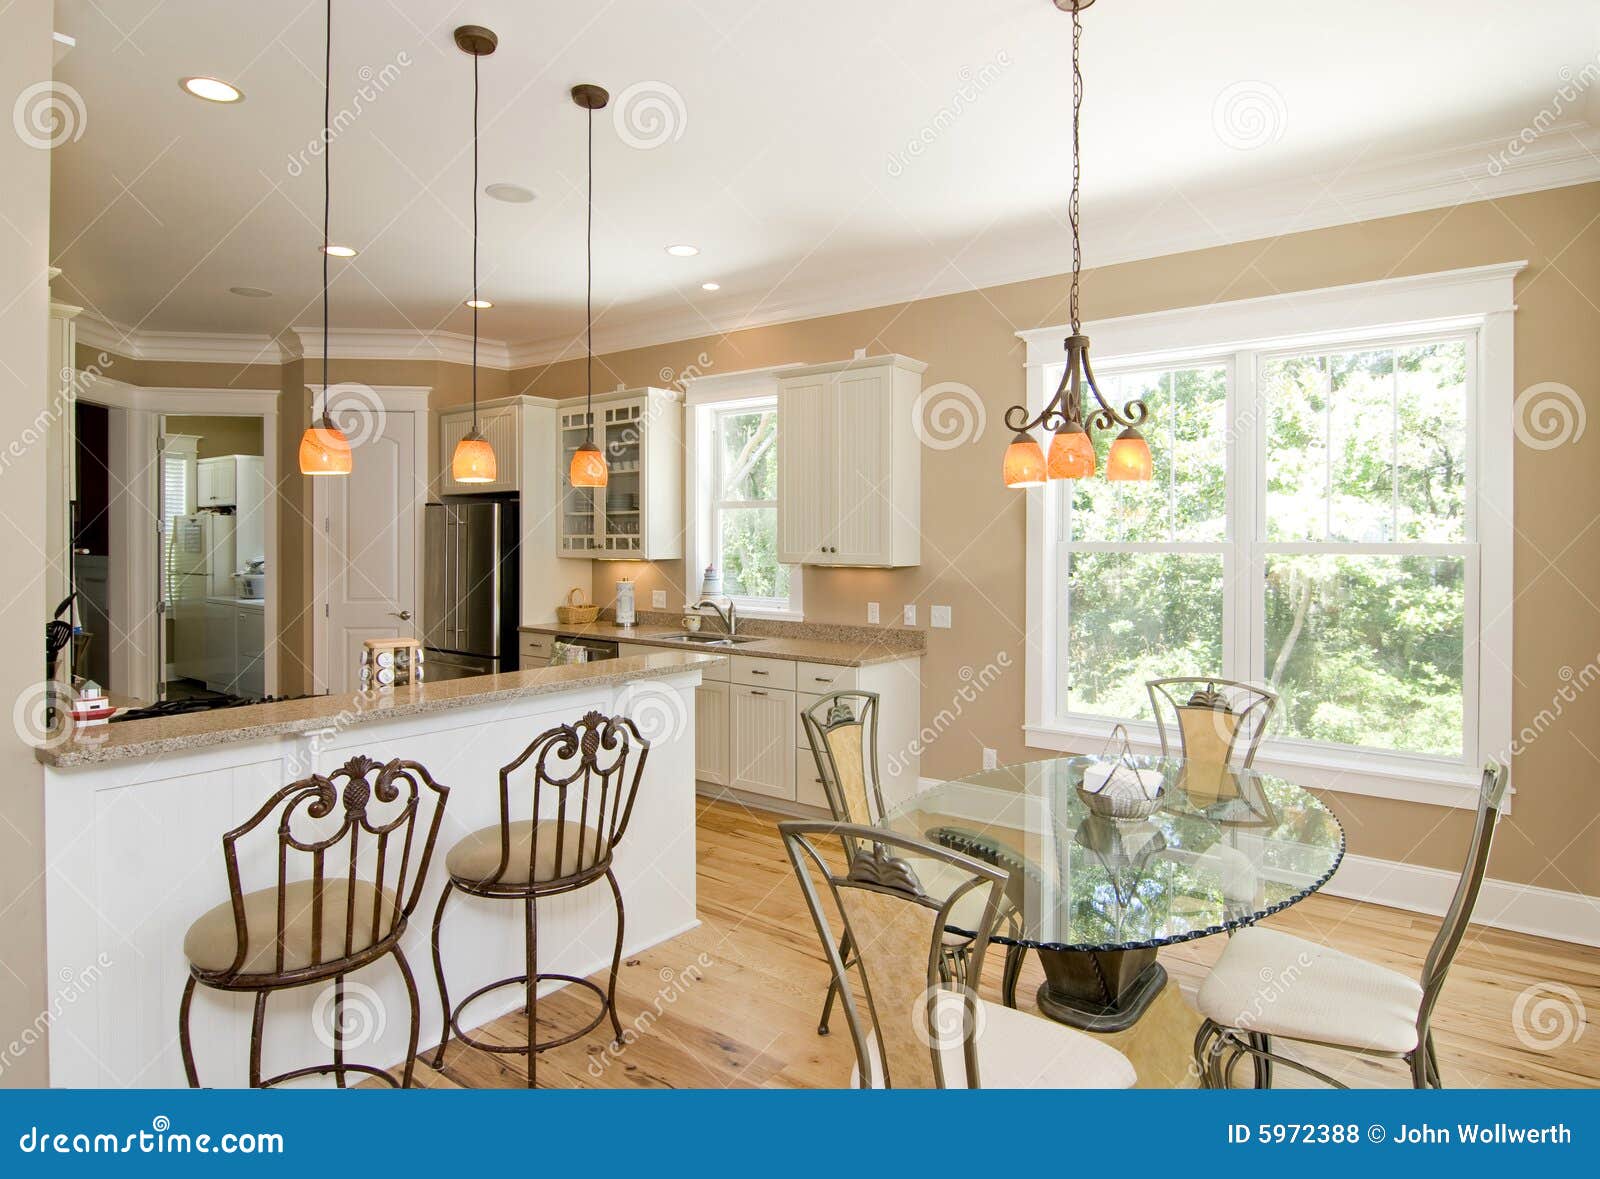 Upscale Kitchen And Dining Room Royalty Free Stock Photos - Image 